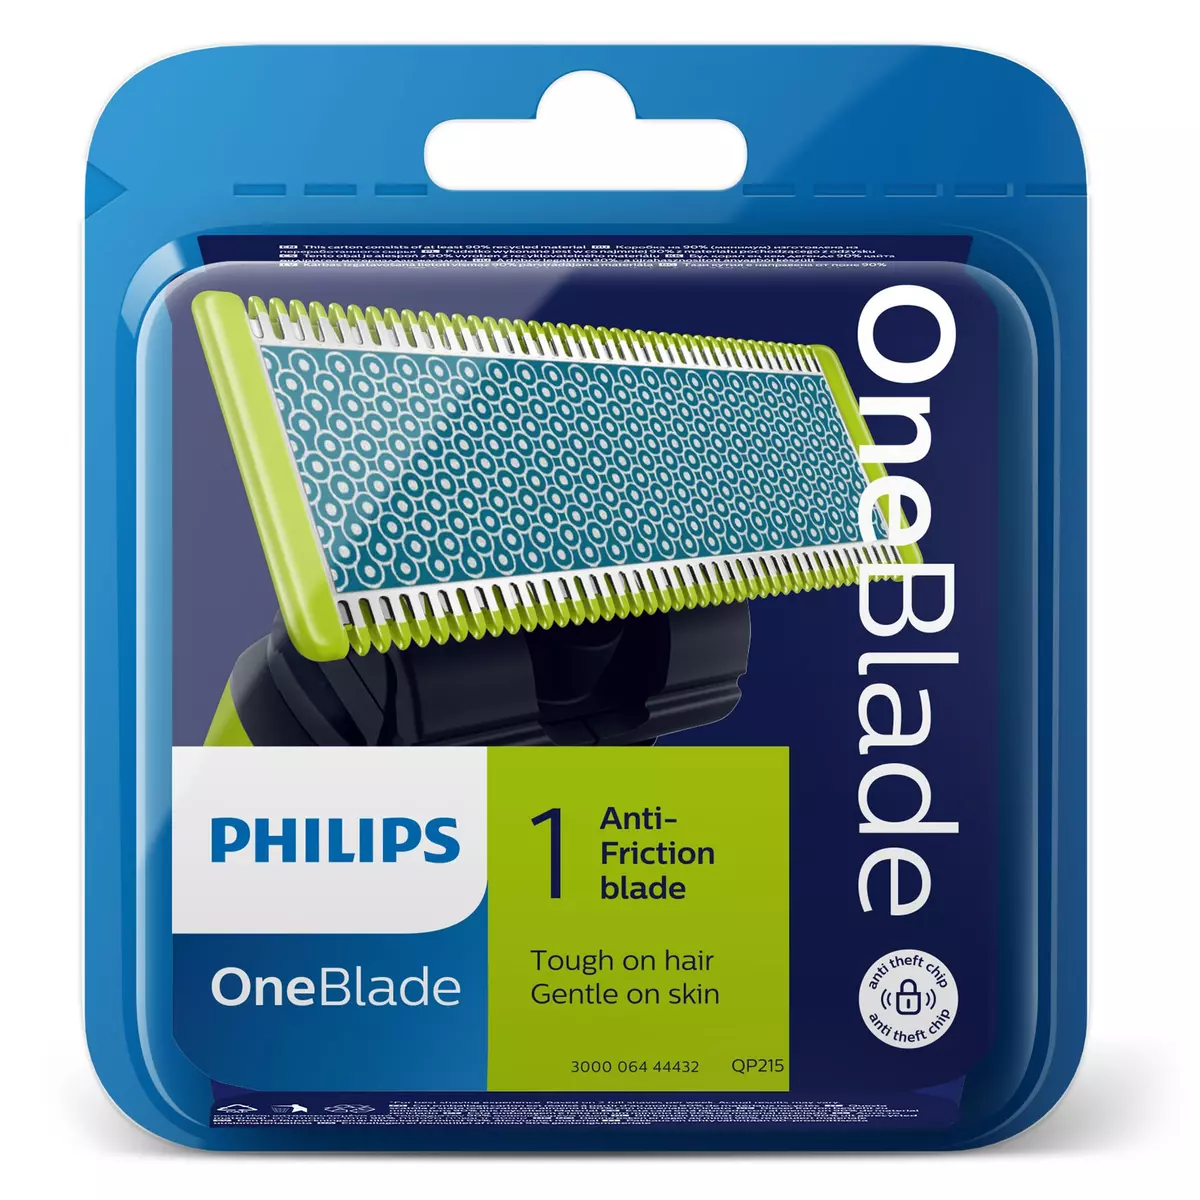 PHILIPS One Blade Lames rasoirs anti frictions 1 pièce